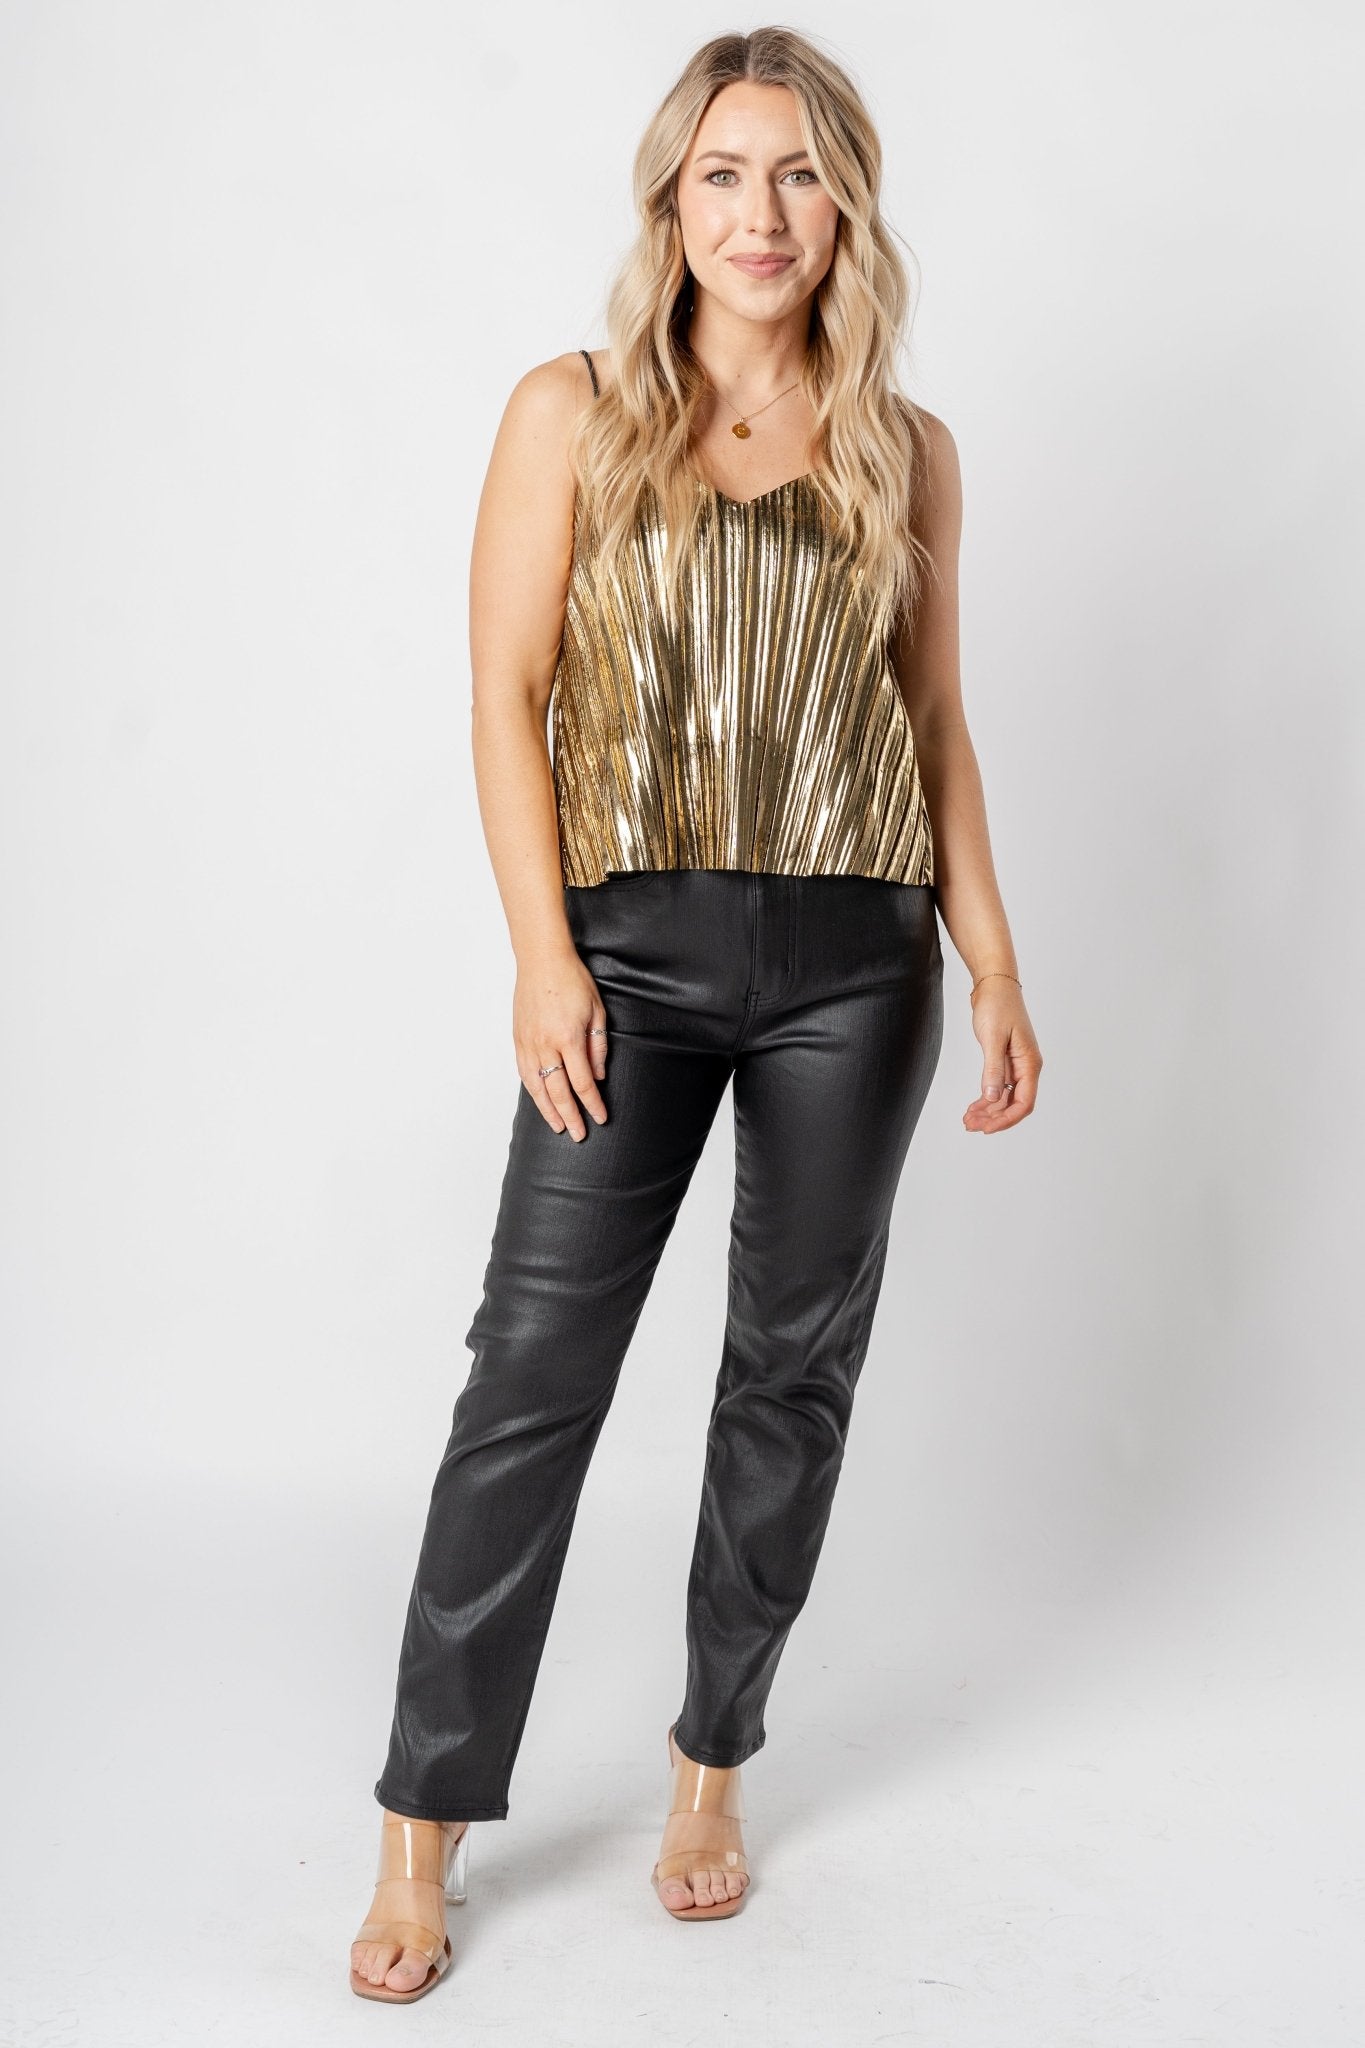 Metallic cami tank top gold/black - Affordable New Year's Eve Party Outfits at Lush Fashion Lounge Boutique in Oklahoma City